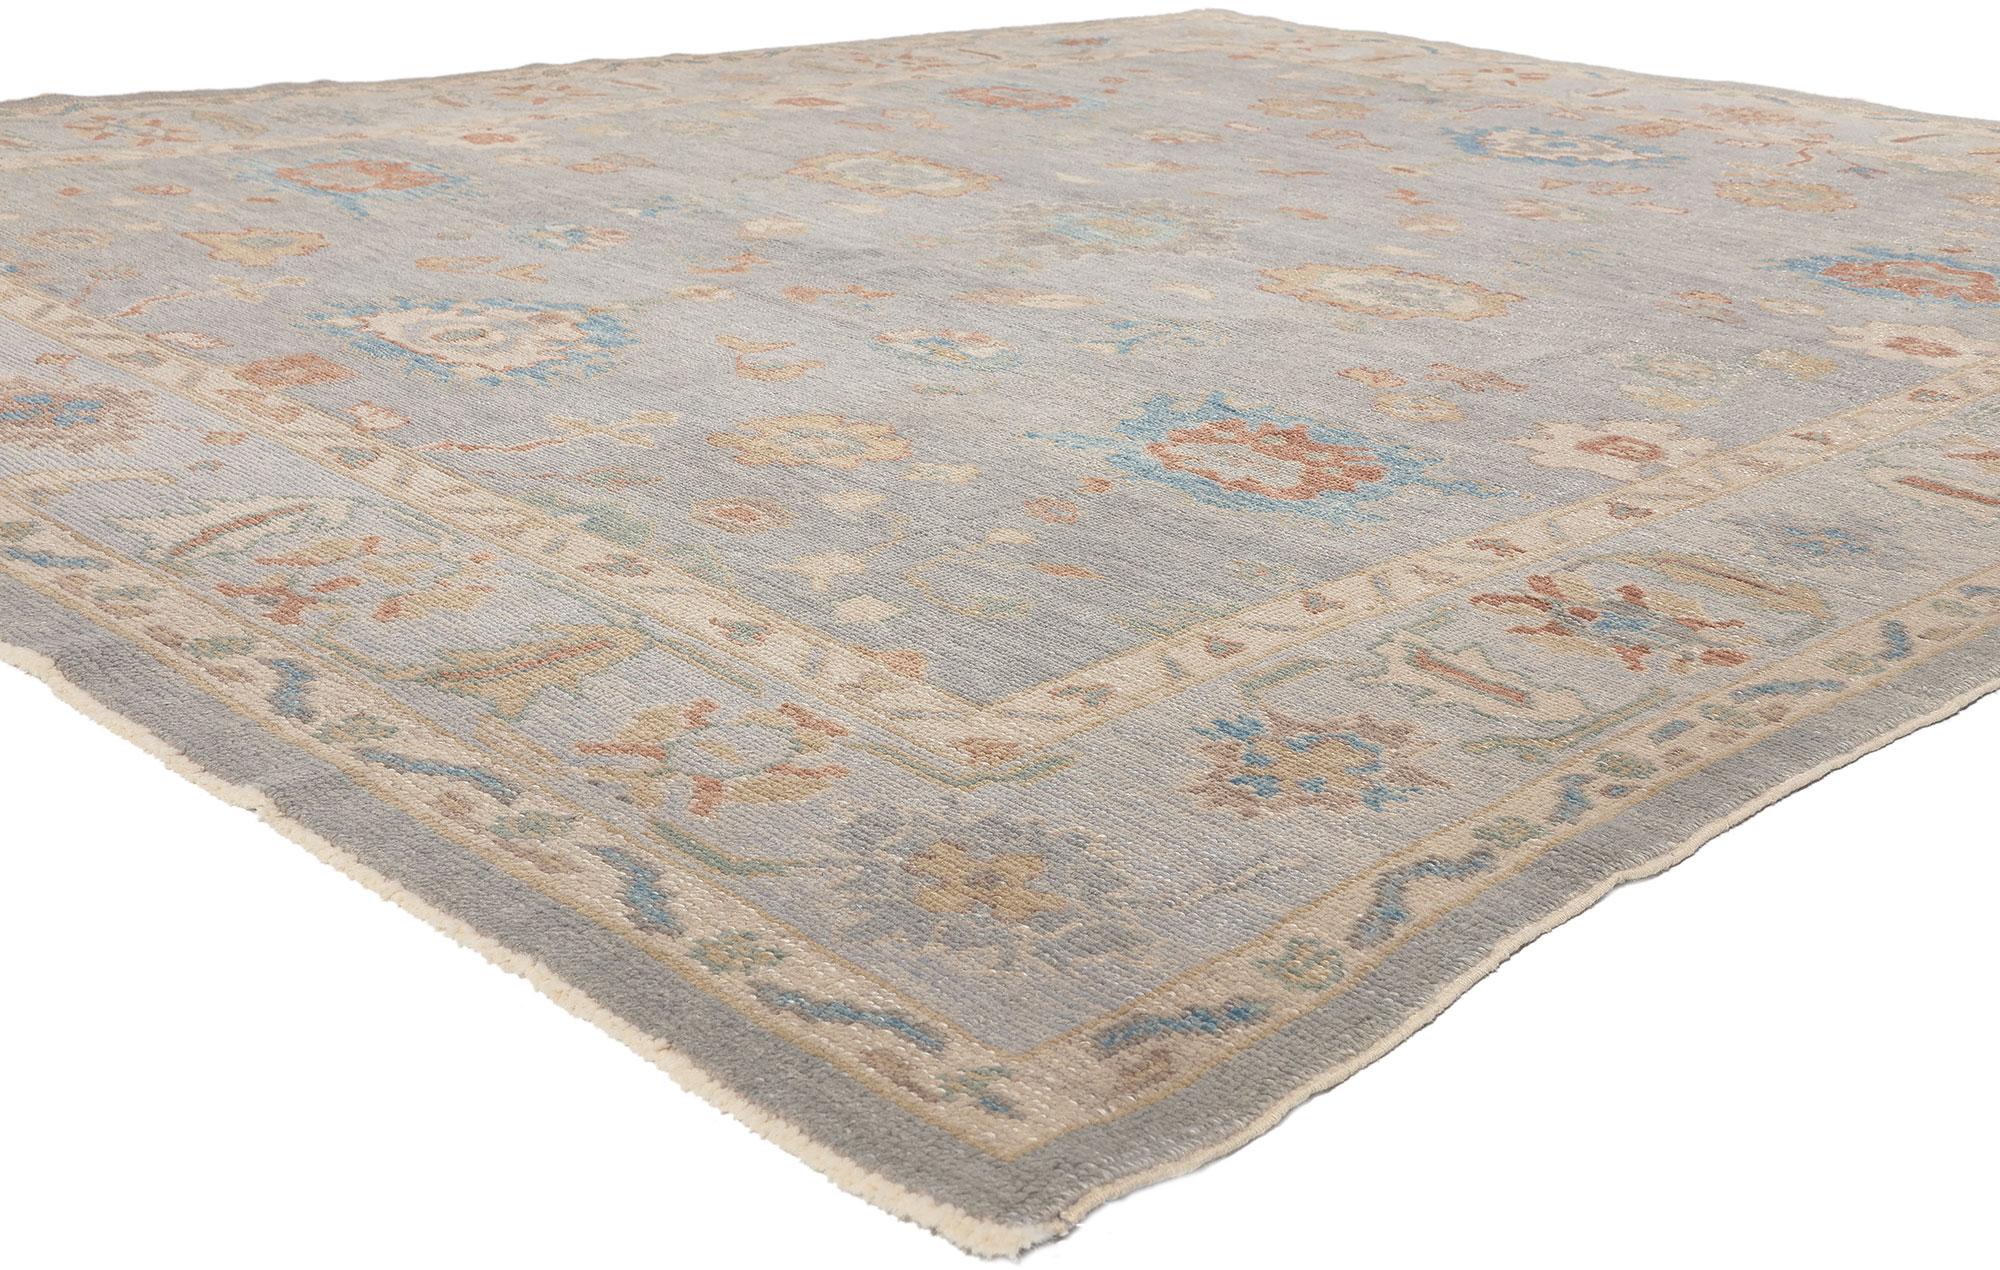 53431 Modern Oushak Turkish Rug, 09'02 x 11'07. 
Blending elements from the modern world with an organic earthy color palette, this hand knotted wool Turkish Oushak rug is poised to impress. The geometric print and earth-tone colors woven into this